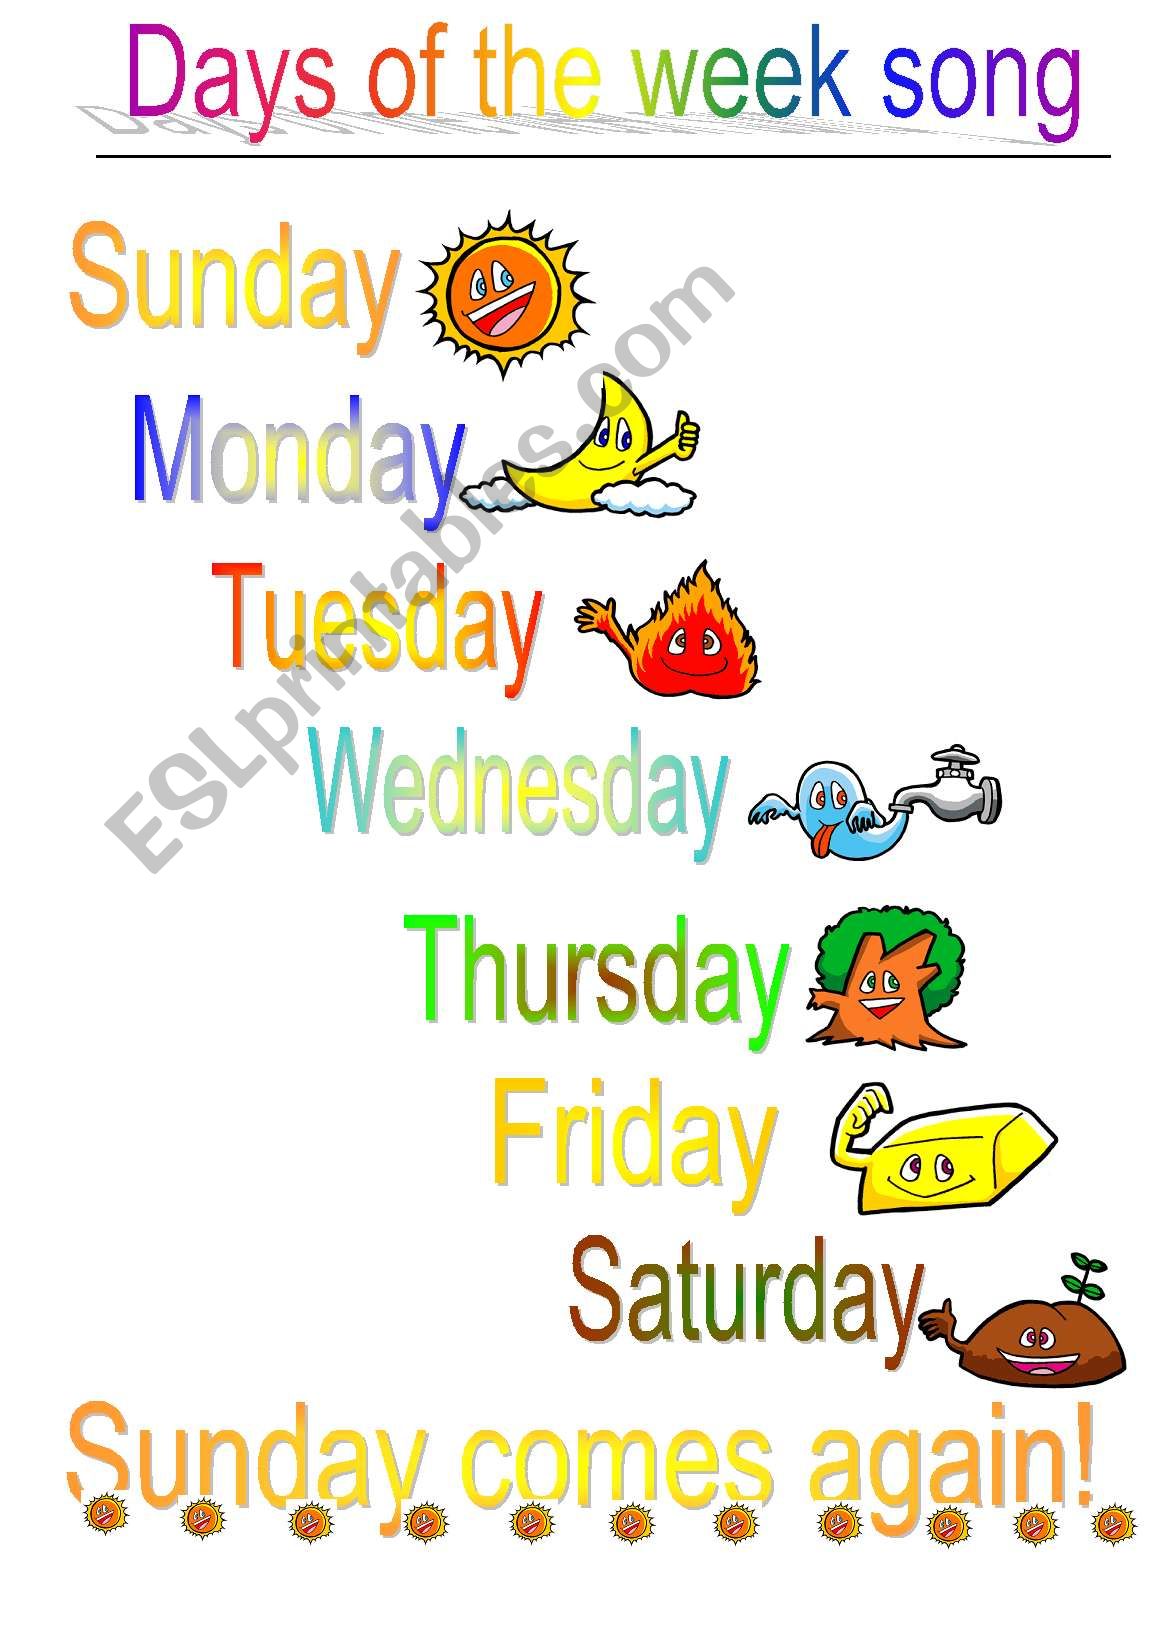 days-of-the-week-song-esl-worksheet-by-lippy-madrid